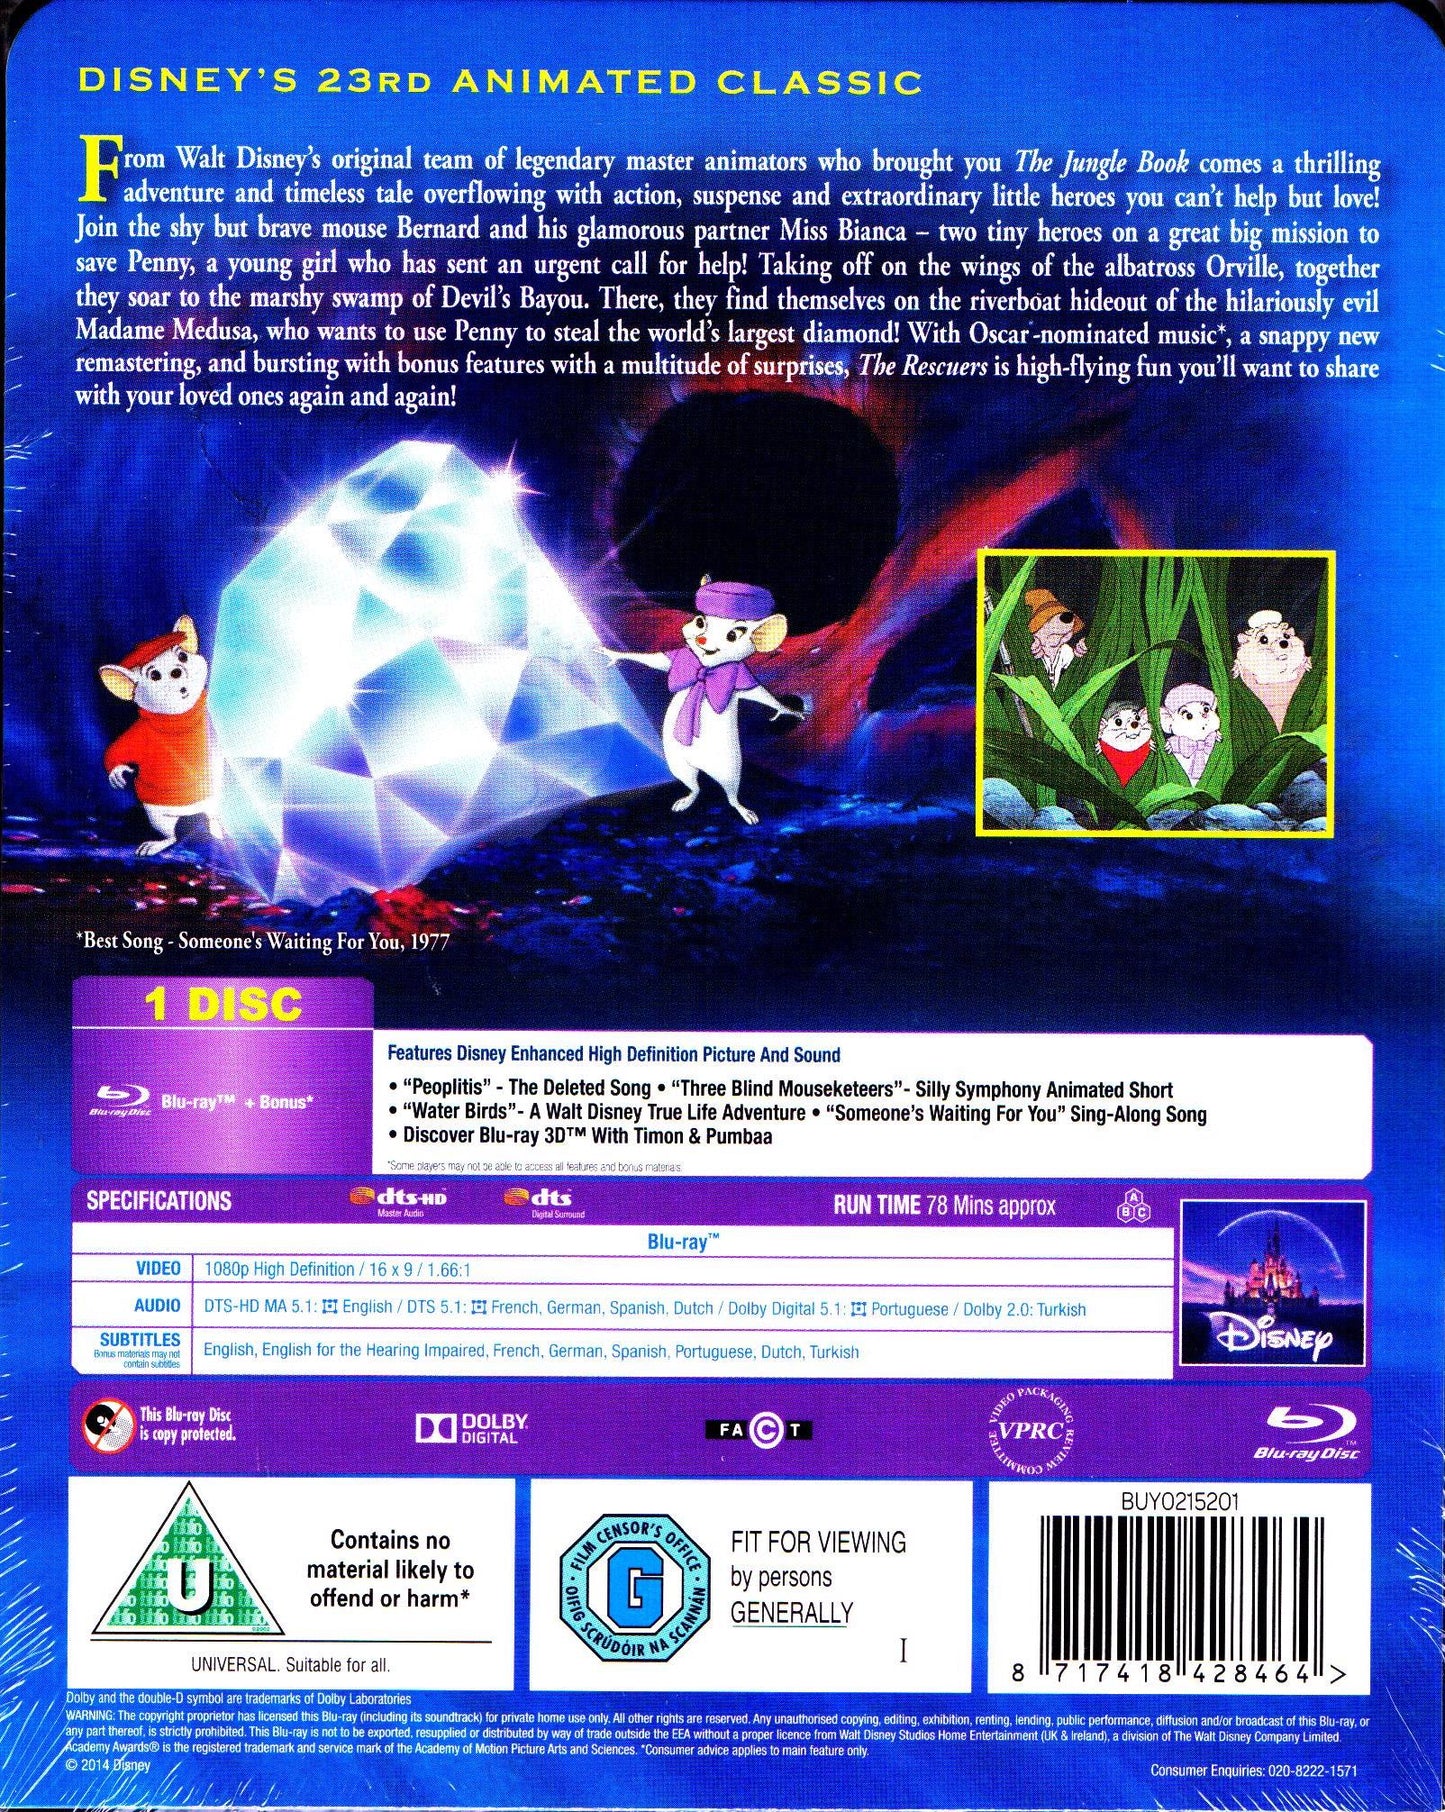 The Rescuers SteelBook: Disney Collection #22 (UK)